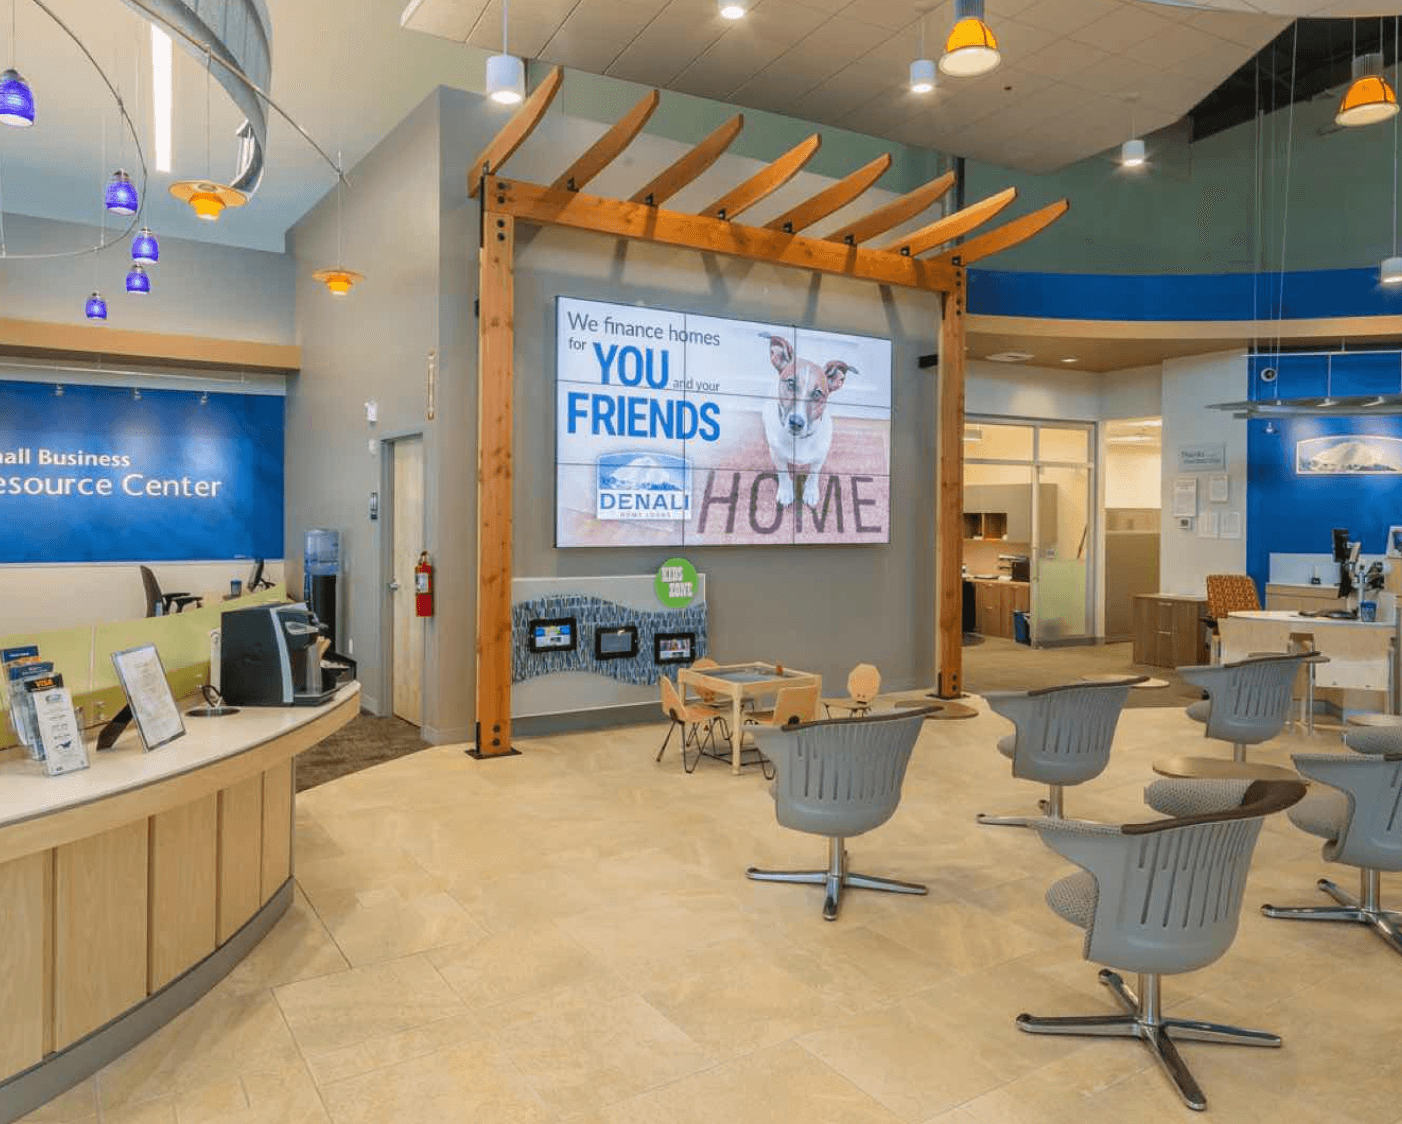 A welcoming financial branch lobby featuring a large central digital display promoting home financing, with comfortable seating and contemporary design elements.